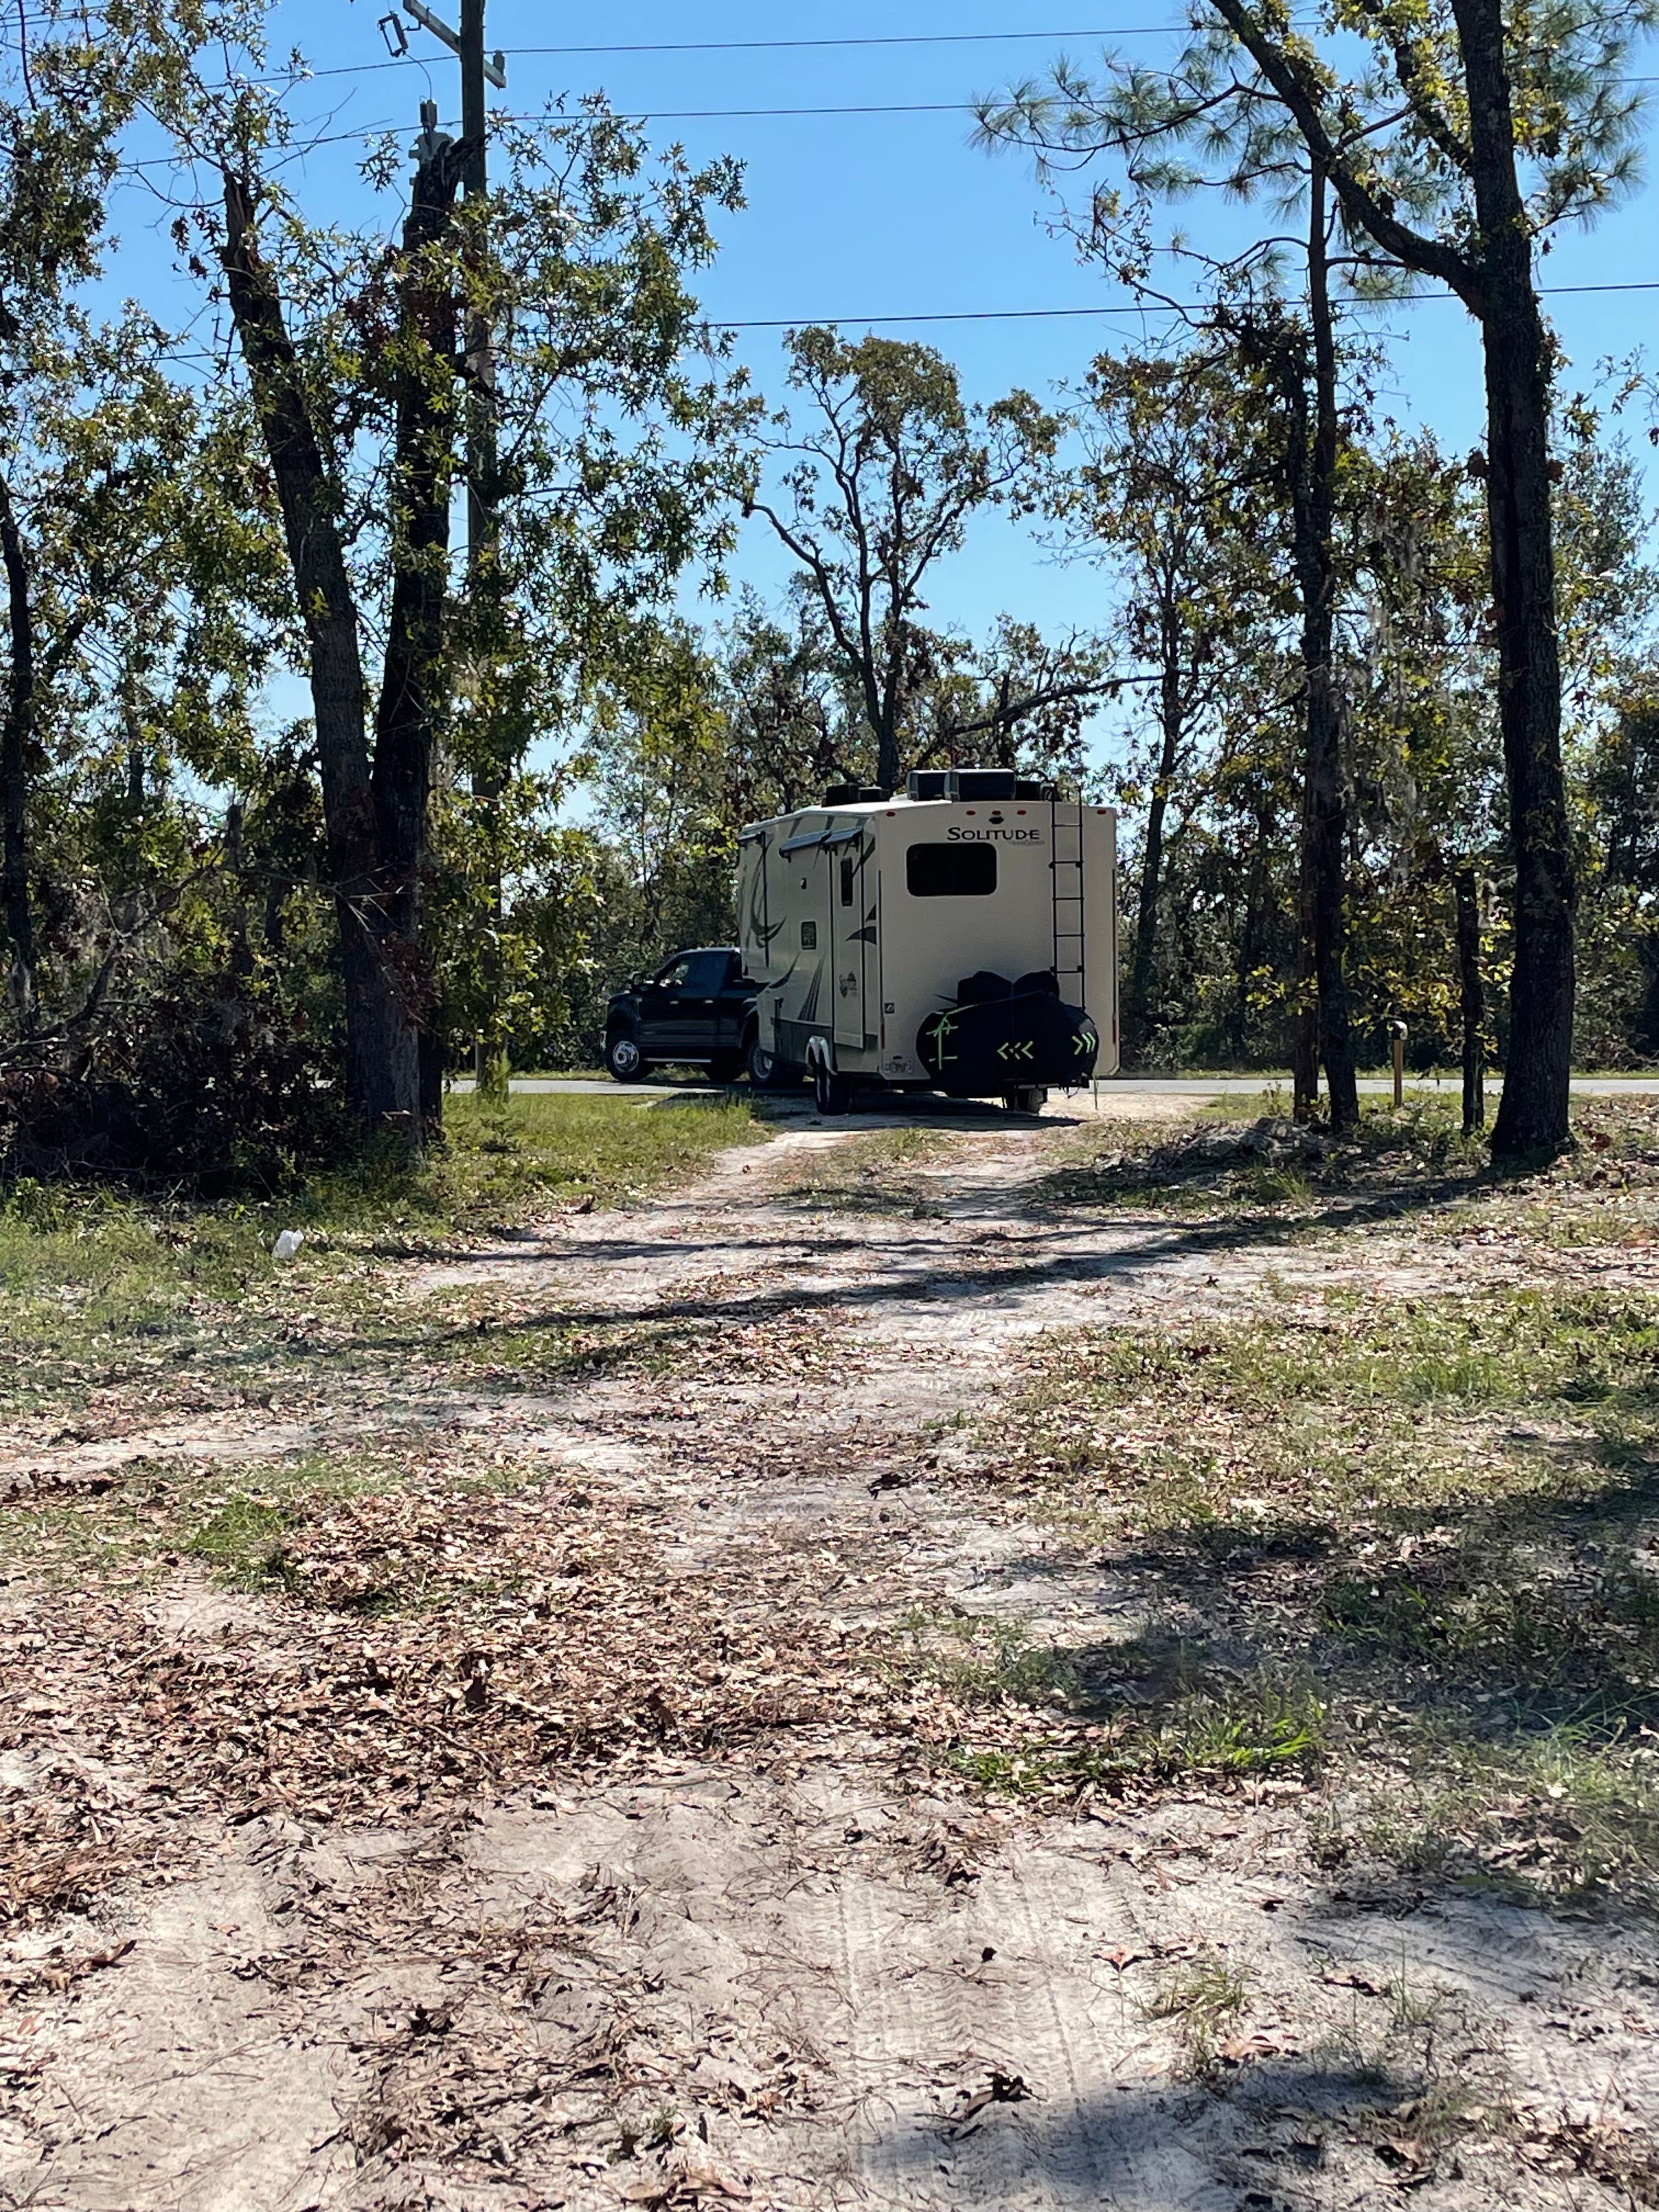 Camper submitted image from Whit’s Homestead in Keaton Beach, FL - 2